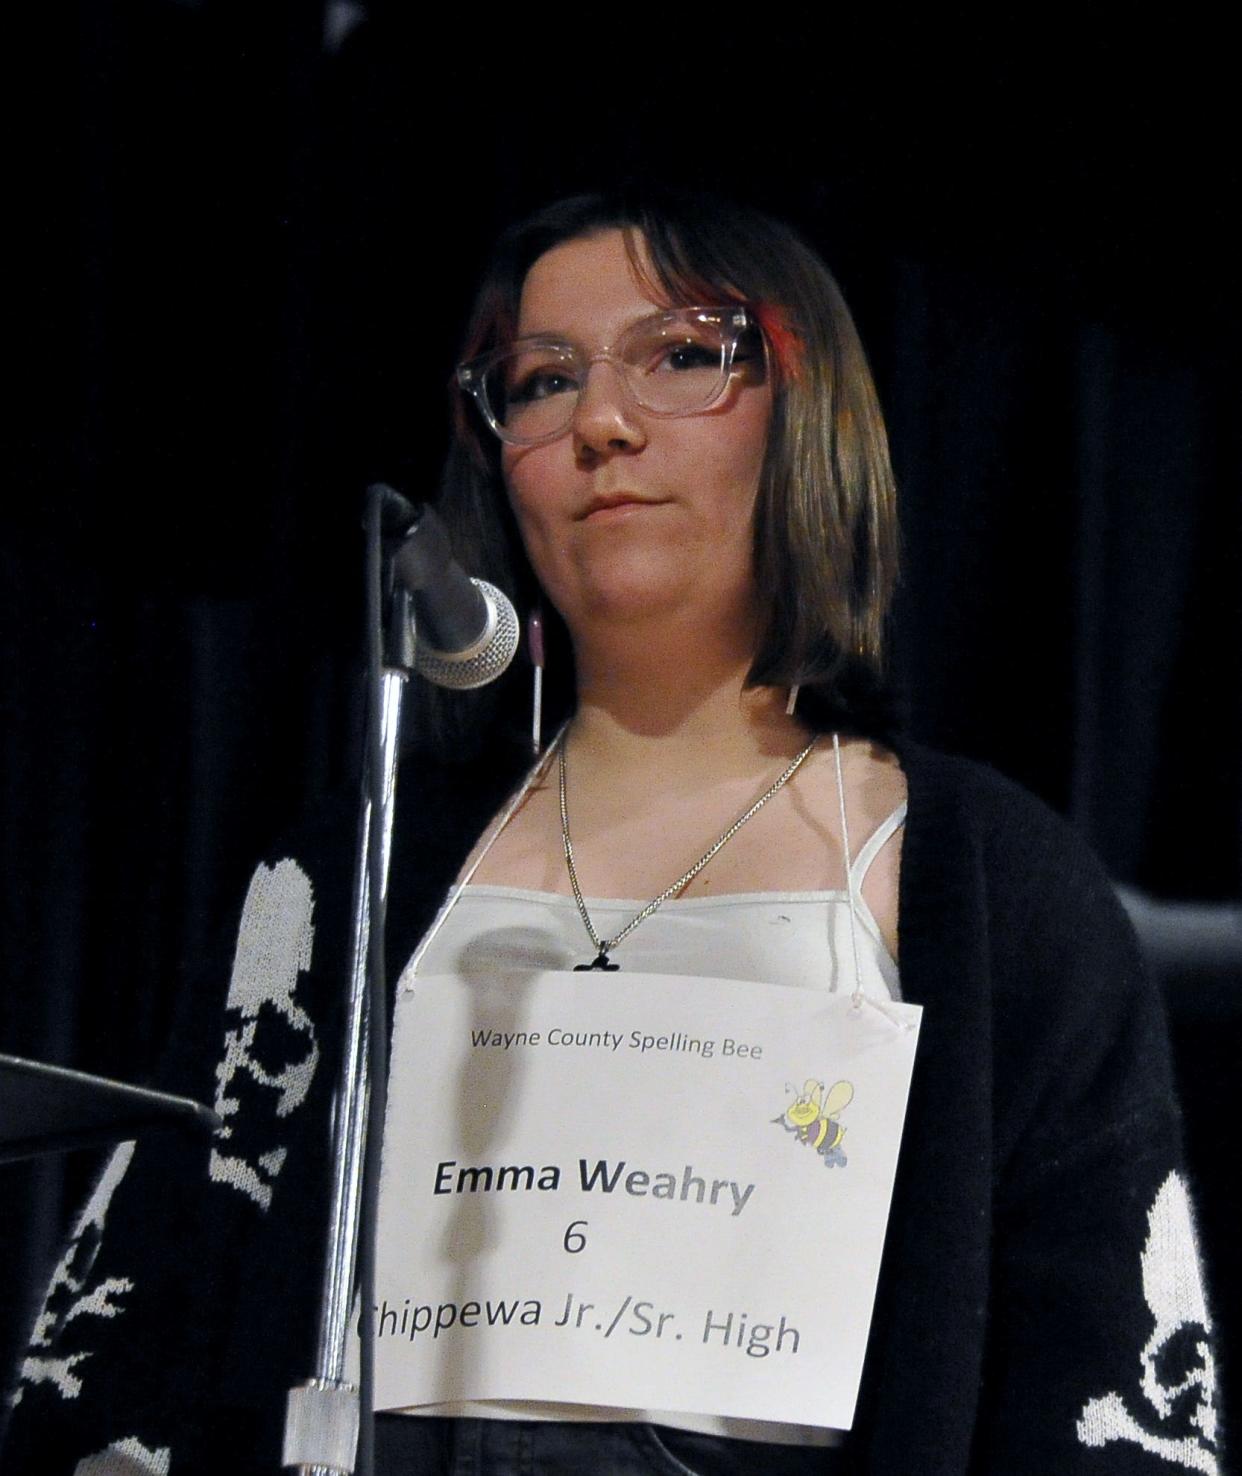 Emma Weahry, Chippewa Jr./Sr. High, competes in last year's Wayne County Spelling Bee. Weahry, who finished second last year, will be competing for top honors this year at Orrville High School on Tuesday.